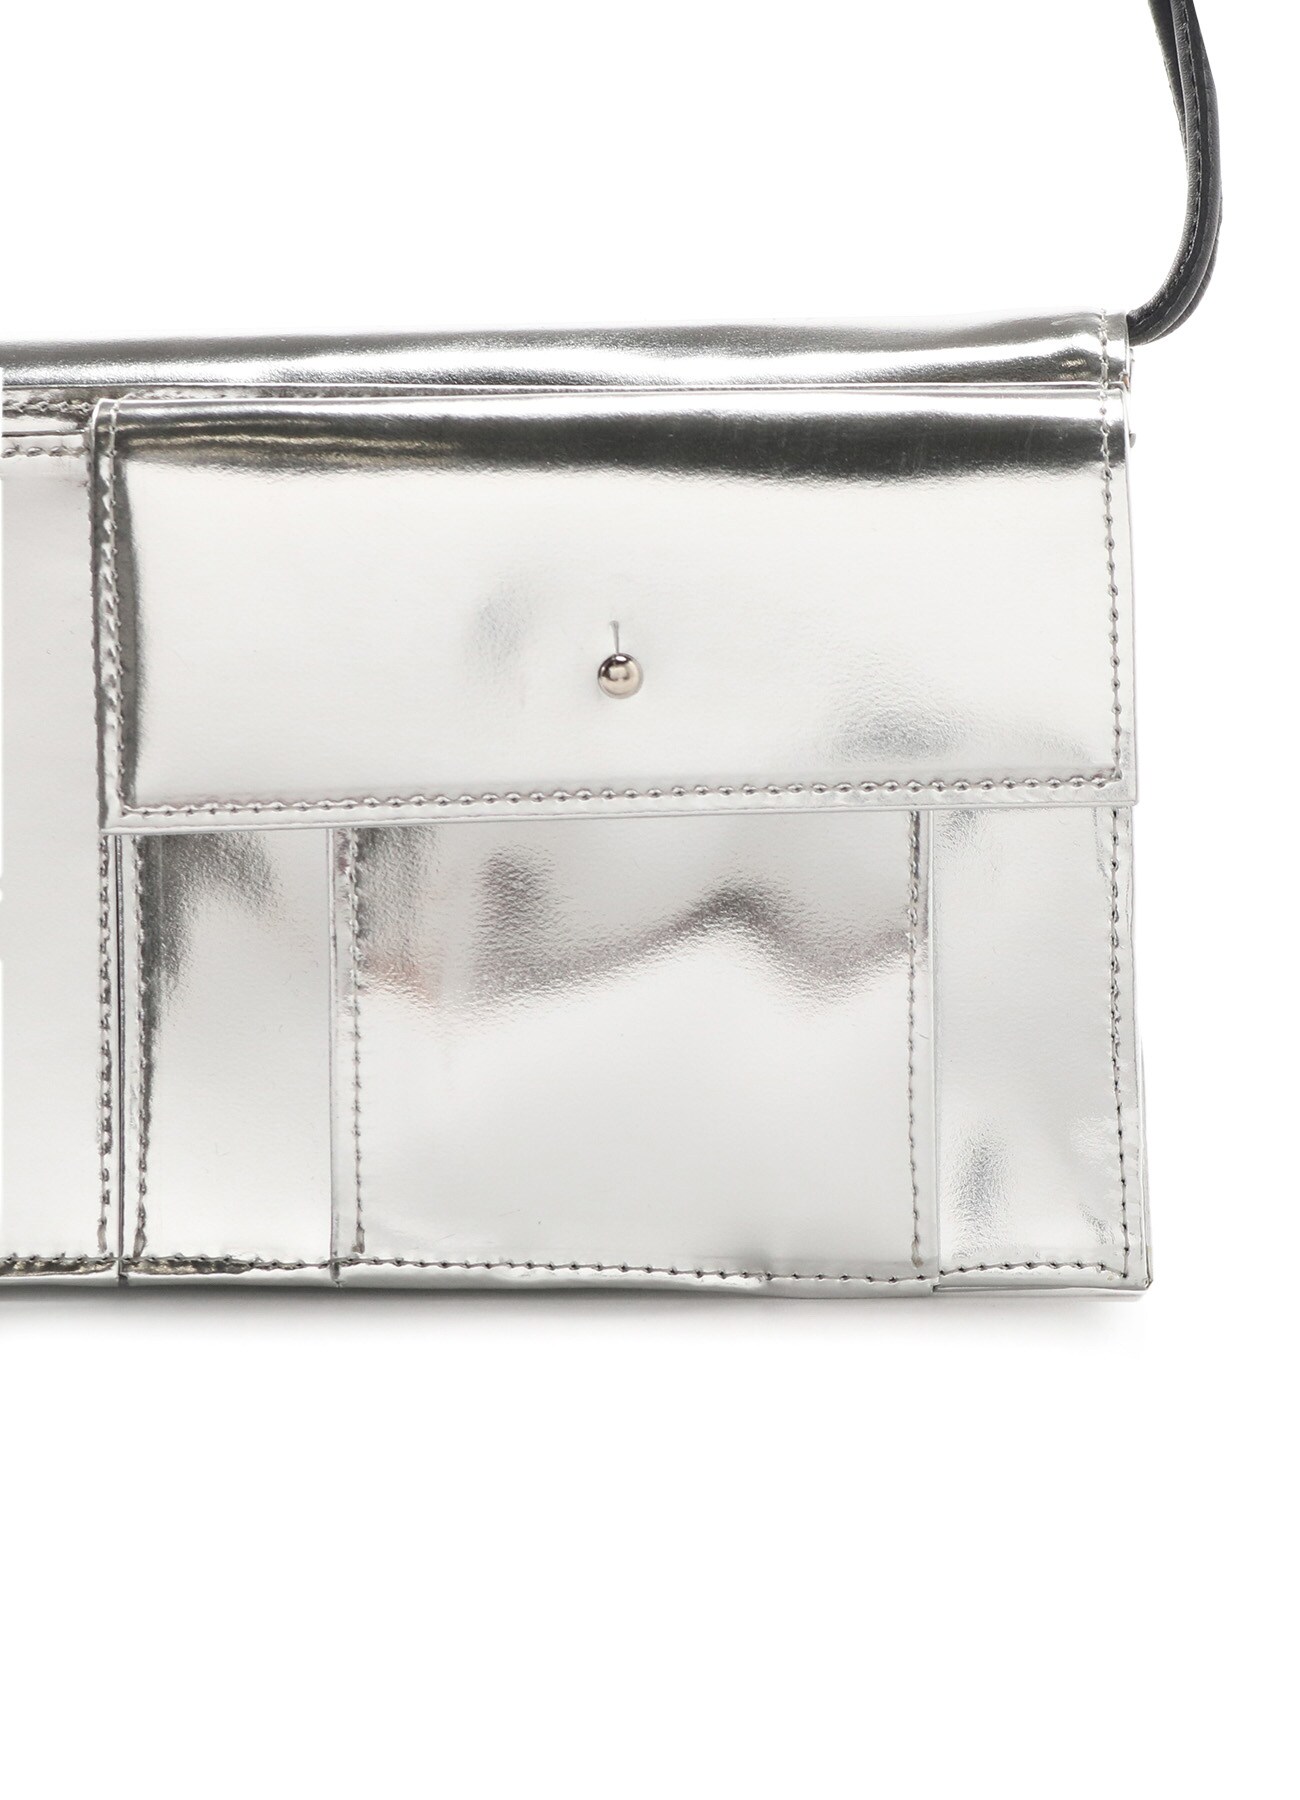 SMOOTH LEATHER FLAP POCHETTE